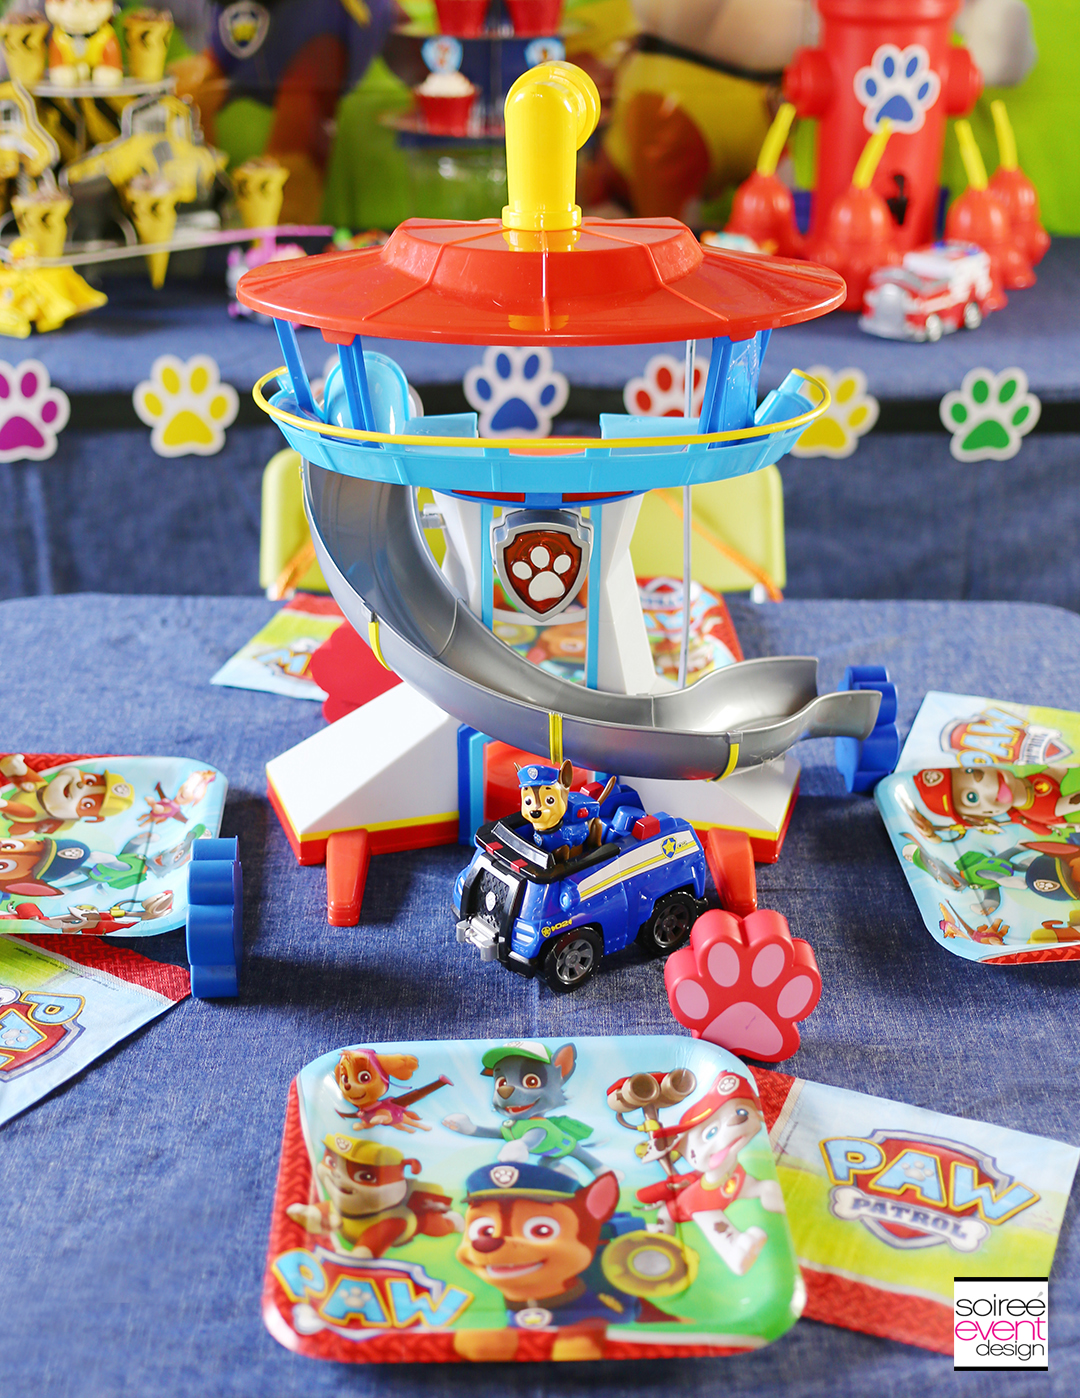 Paw Patrol Party Ideas Your Kids Will LOVE Soiree Event Design